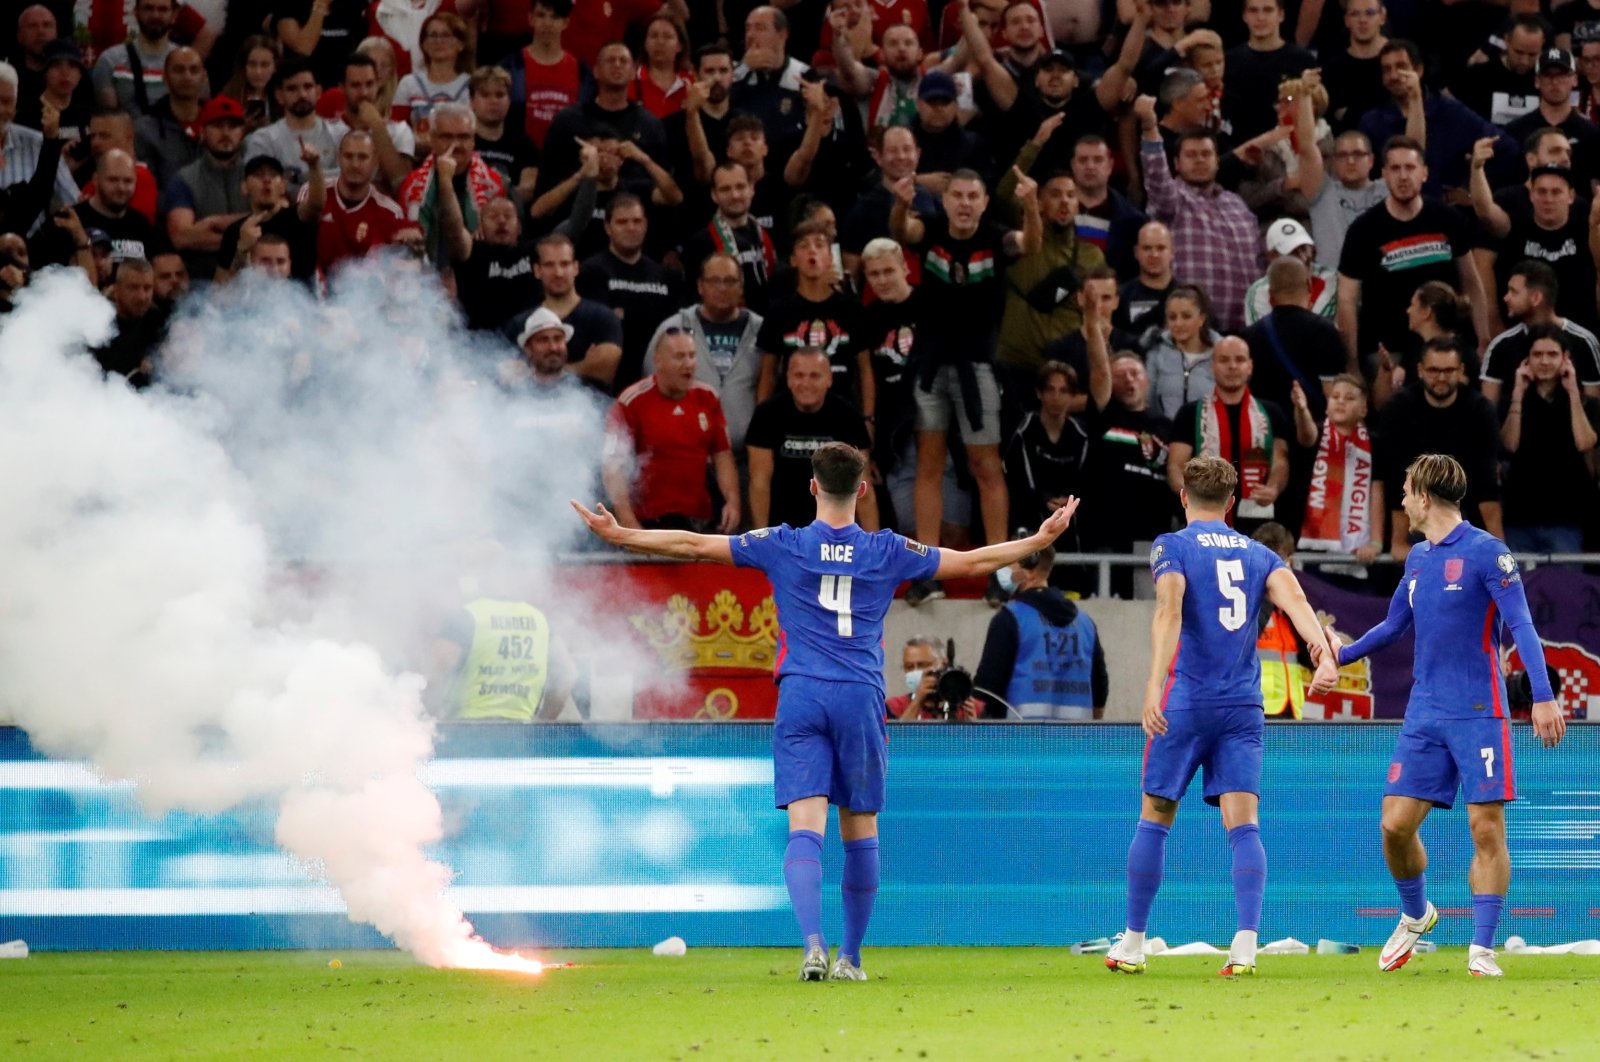 England's Declan Rice (L), John Stones (C) and Jack Grealish react after a flare is thrown onto the pitch by Hungary fans during a World Cup 2022 qualifiers at the Puskas Arena, Budapest, Hungary, Sept. 2, 2021.